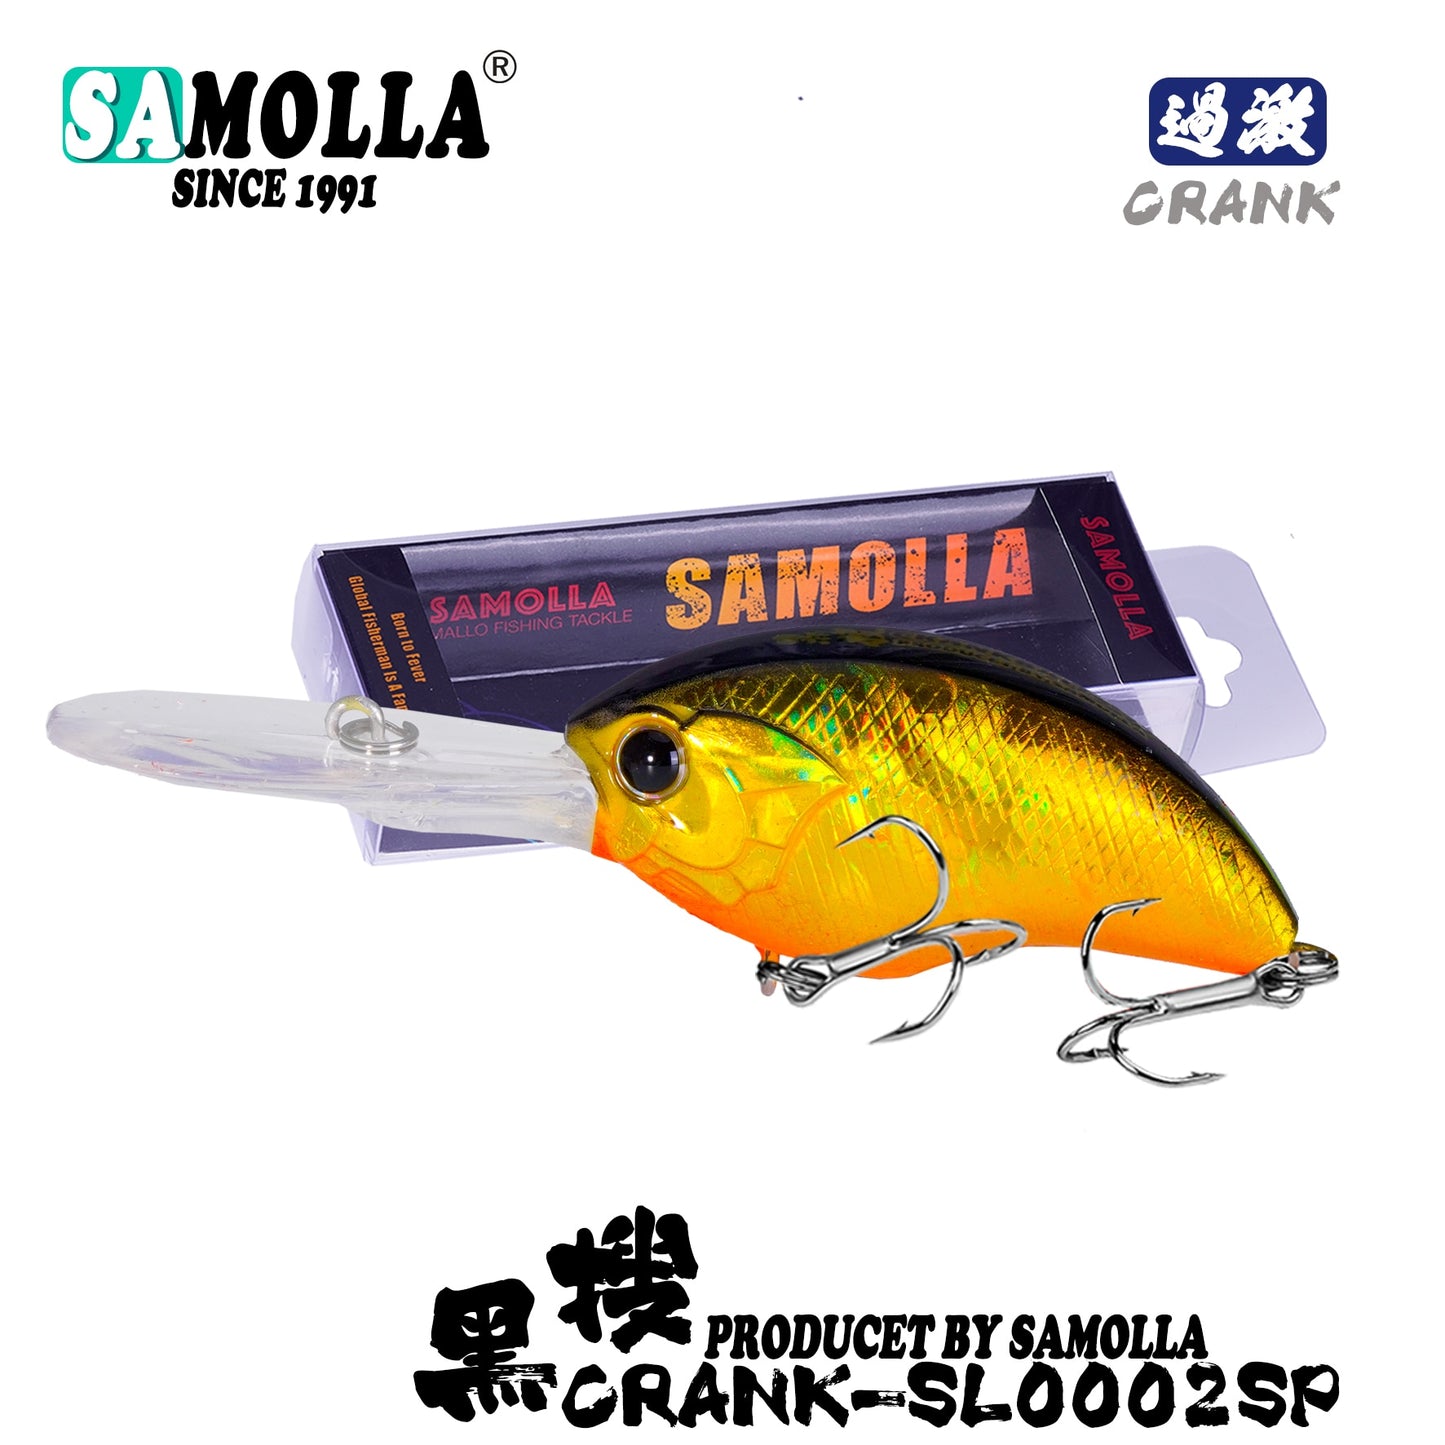 2022 Crankbaits Fishing Lure Crank Weights 12.3g 0.8-3m Pesca Pike Isca Artificial Saltwater Bass Lures Whopper Baits Carp Fish